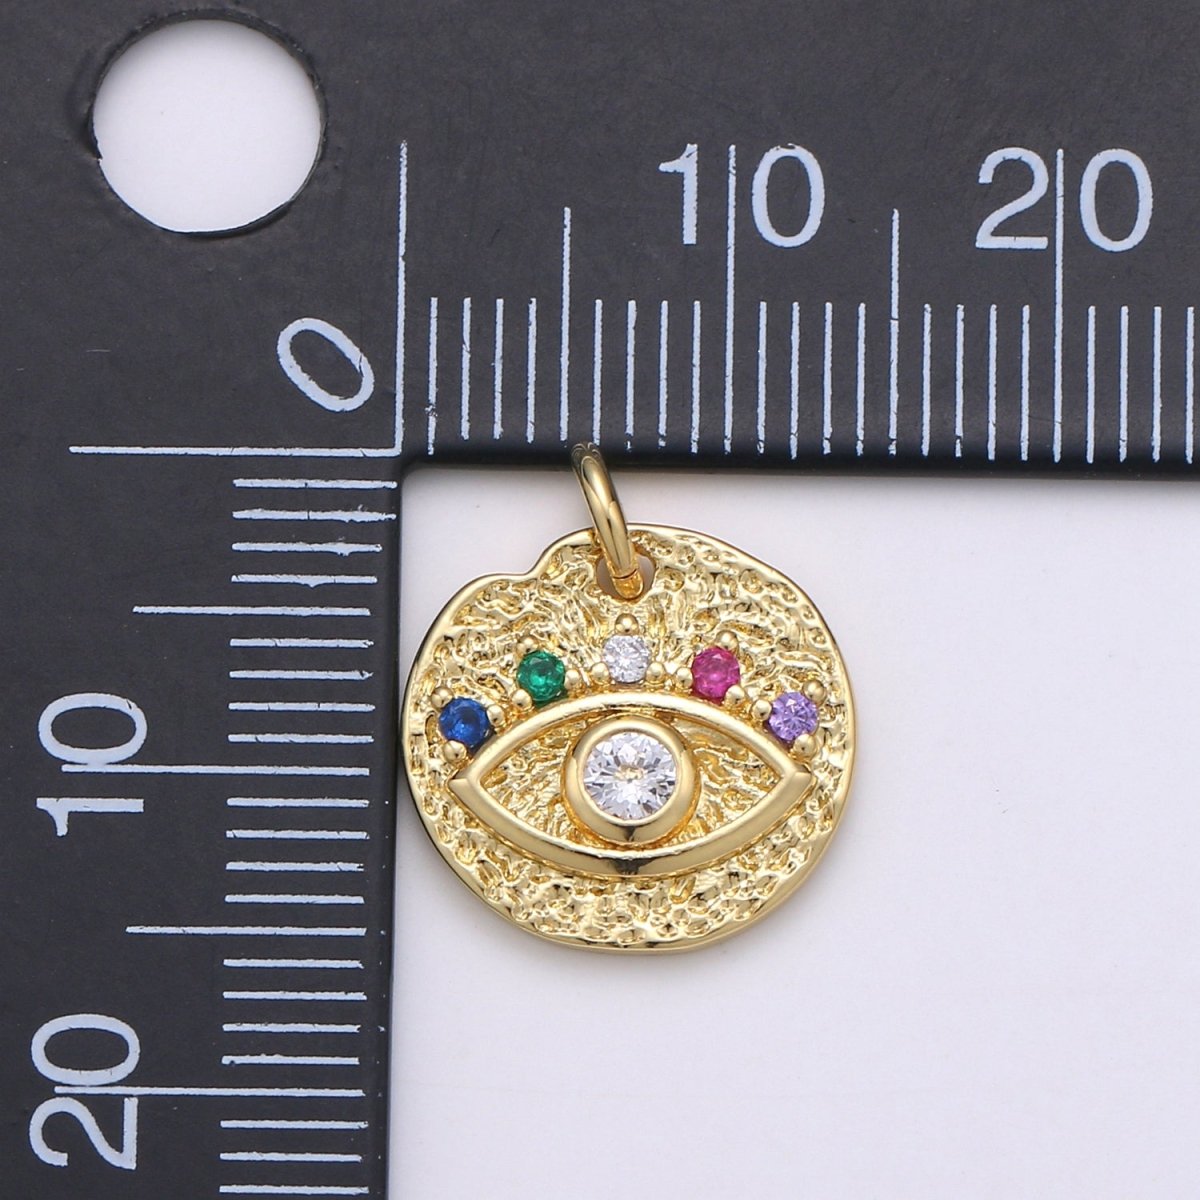 24K Gold Filled Evil Eye Coin Charm Round Disc Evil Eye Pendant Necklace, Gold Medallion Rustic Charm Cubic Eye Charm D-873 - DLUXCA